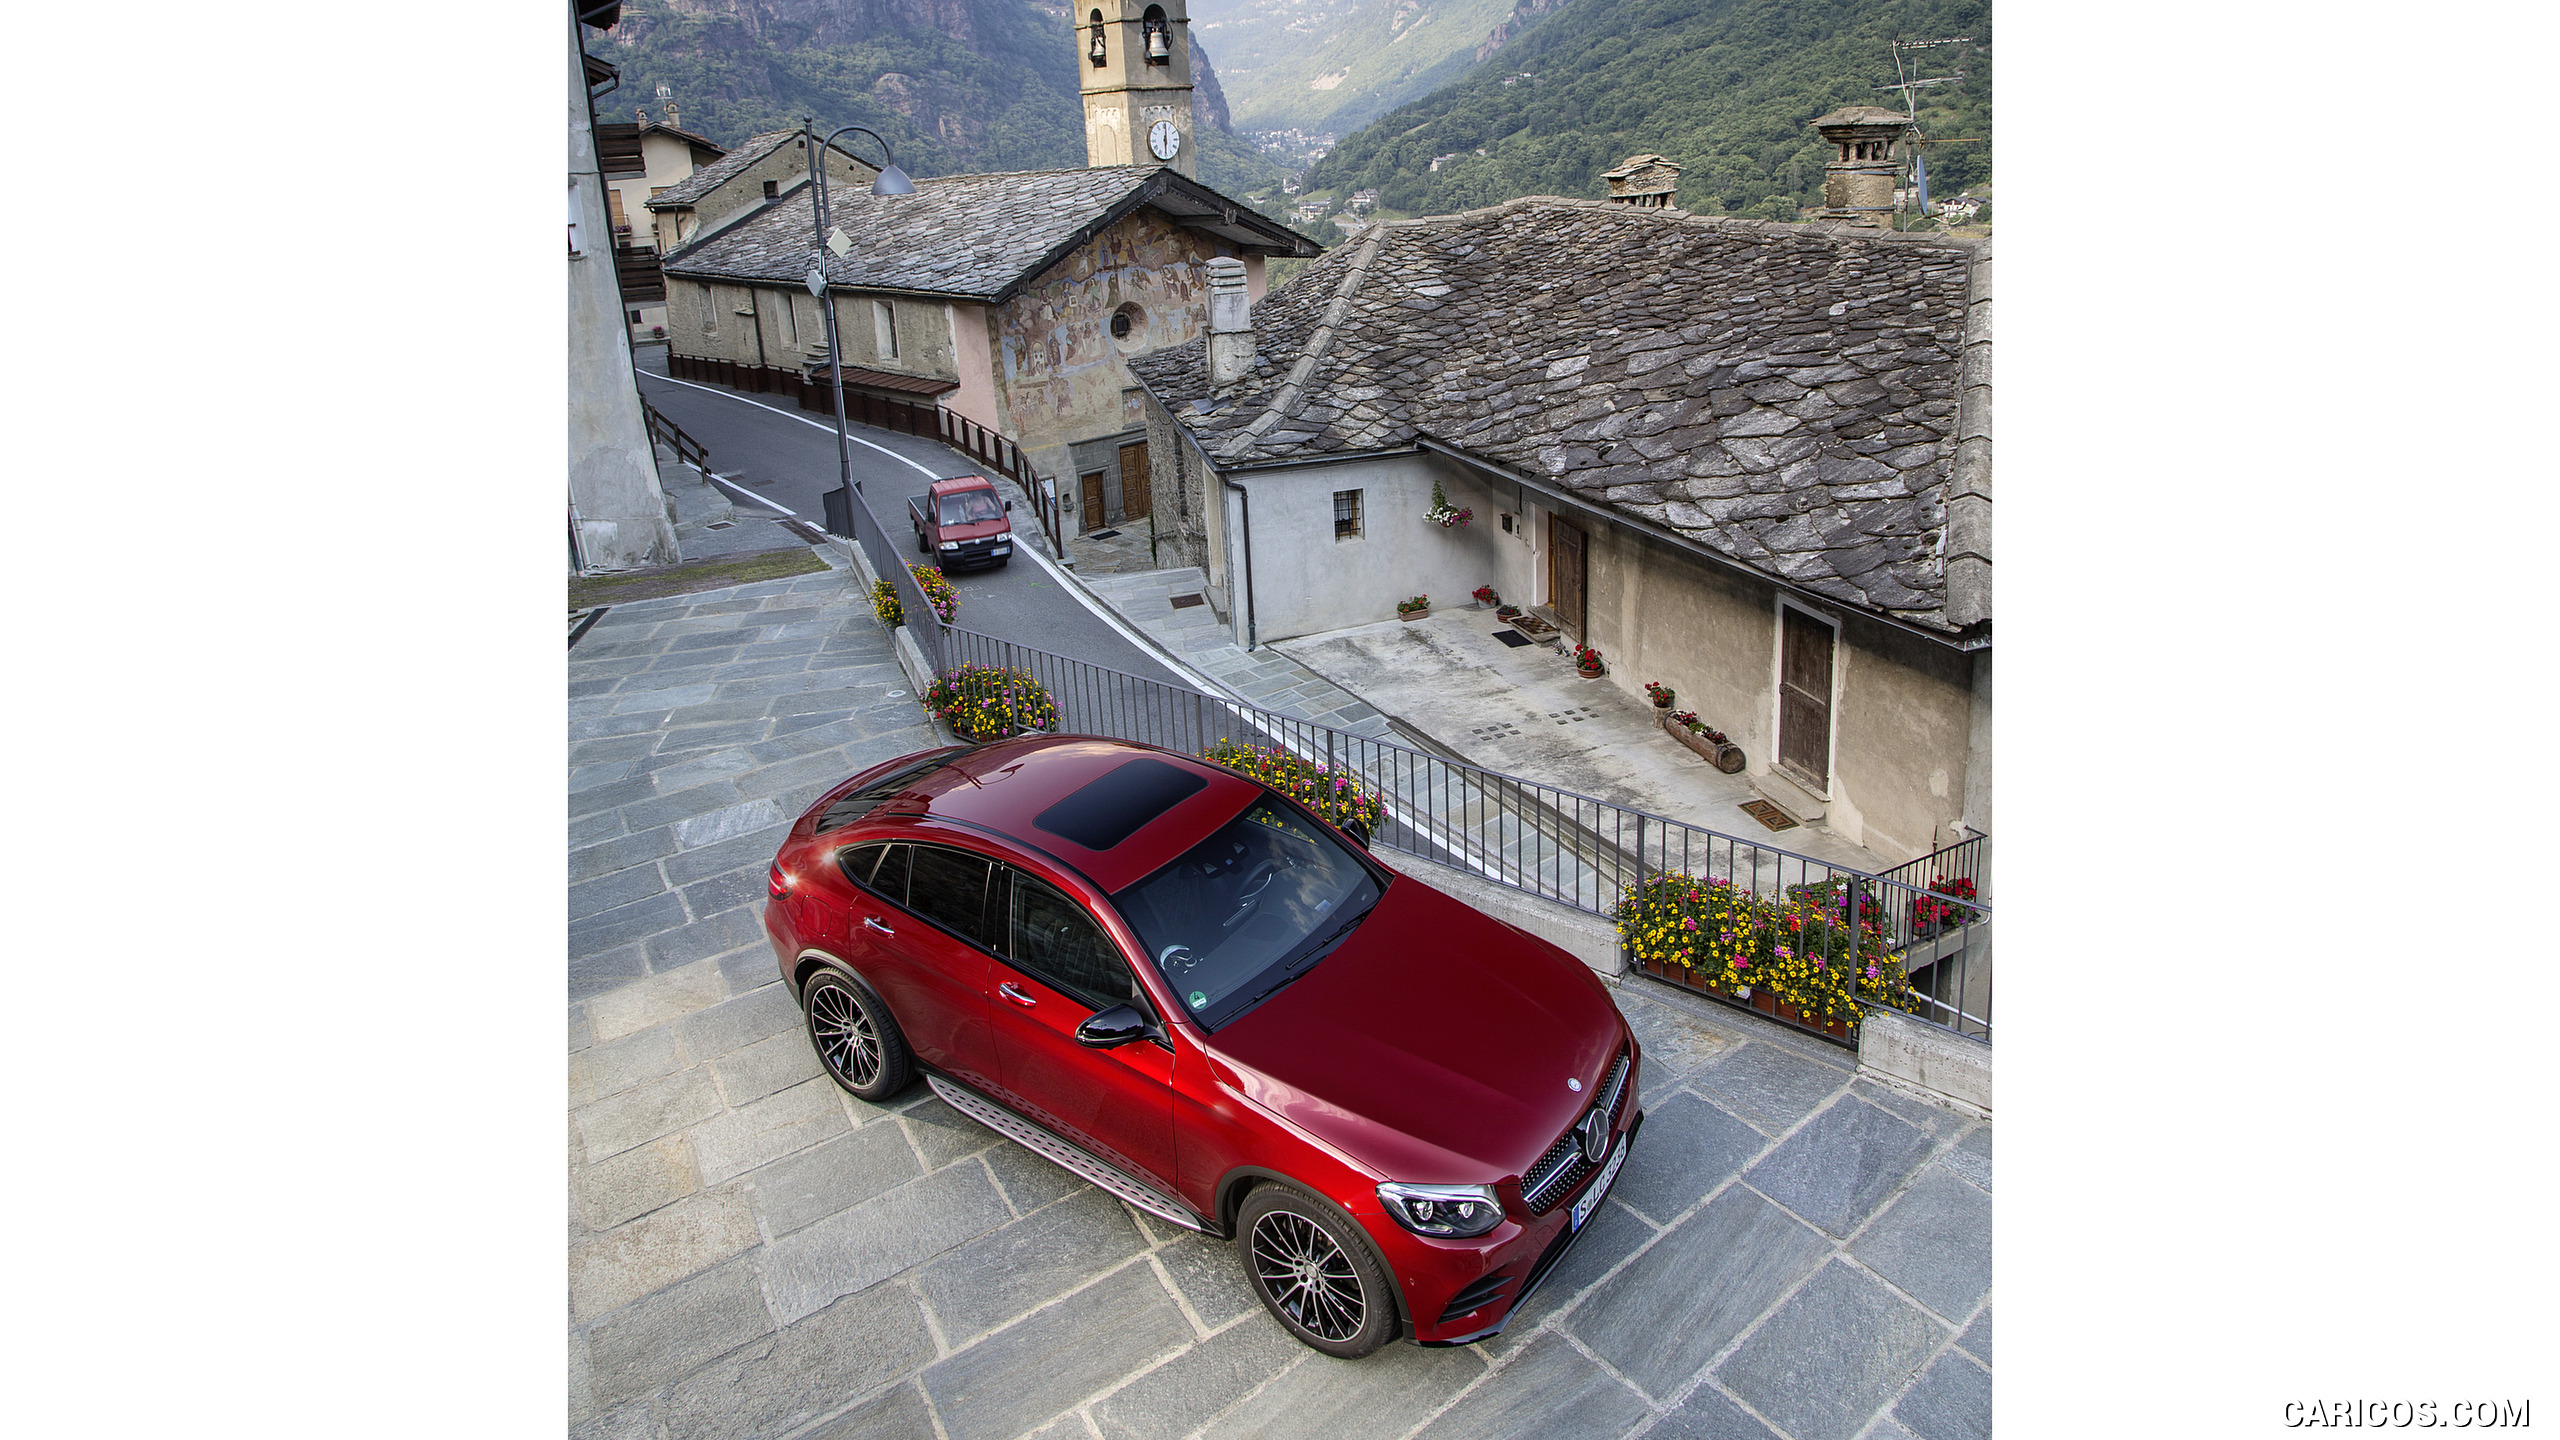 2017 Mercedes-Benz GLC 350 d Coupe (Diesel; Color: Hyacinth Red) - Top, #79 of 144